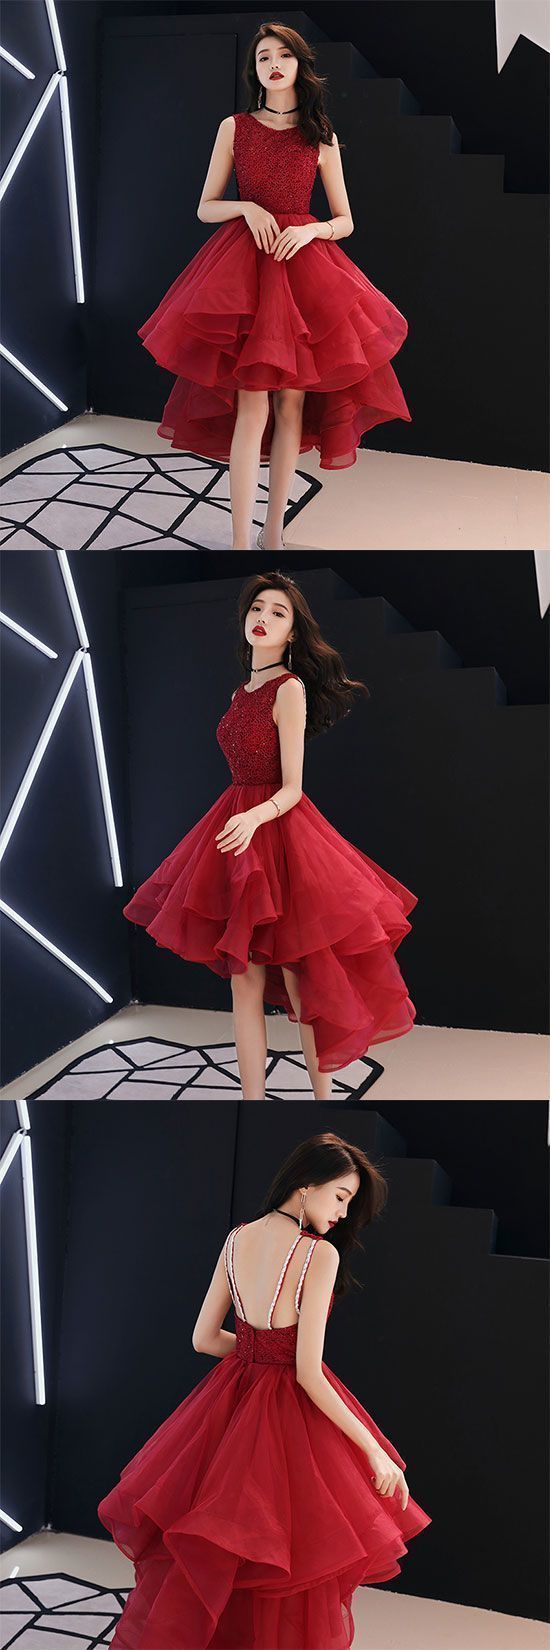 Cute Round A Line Destiny Homecoming Dresses Neck Tulle Short Dress CD881